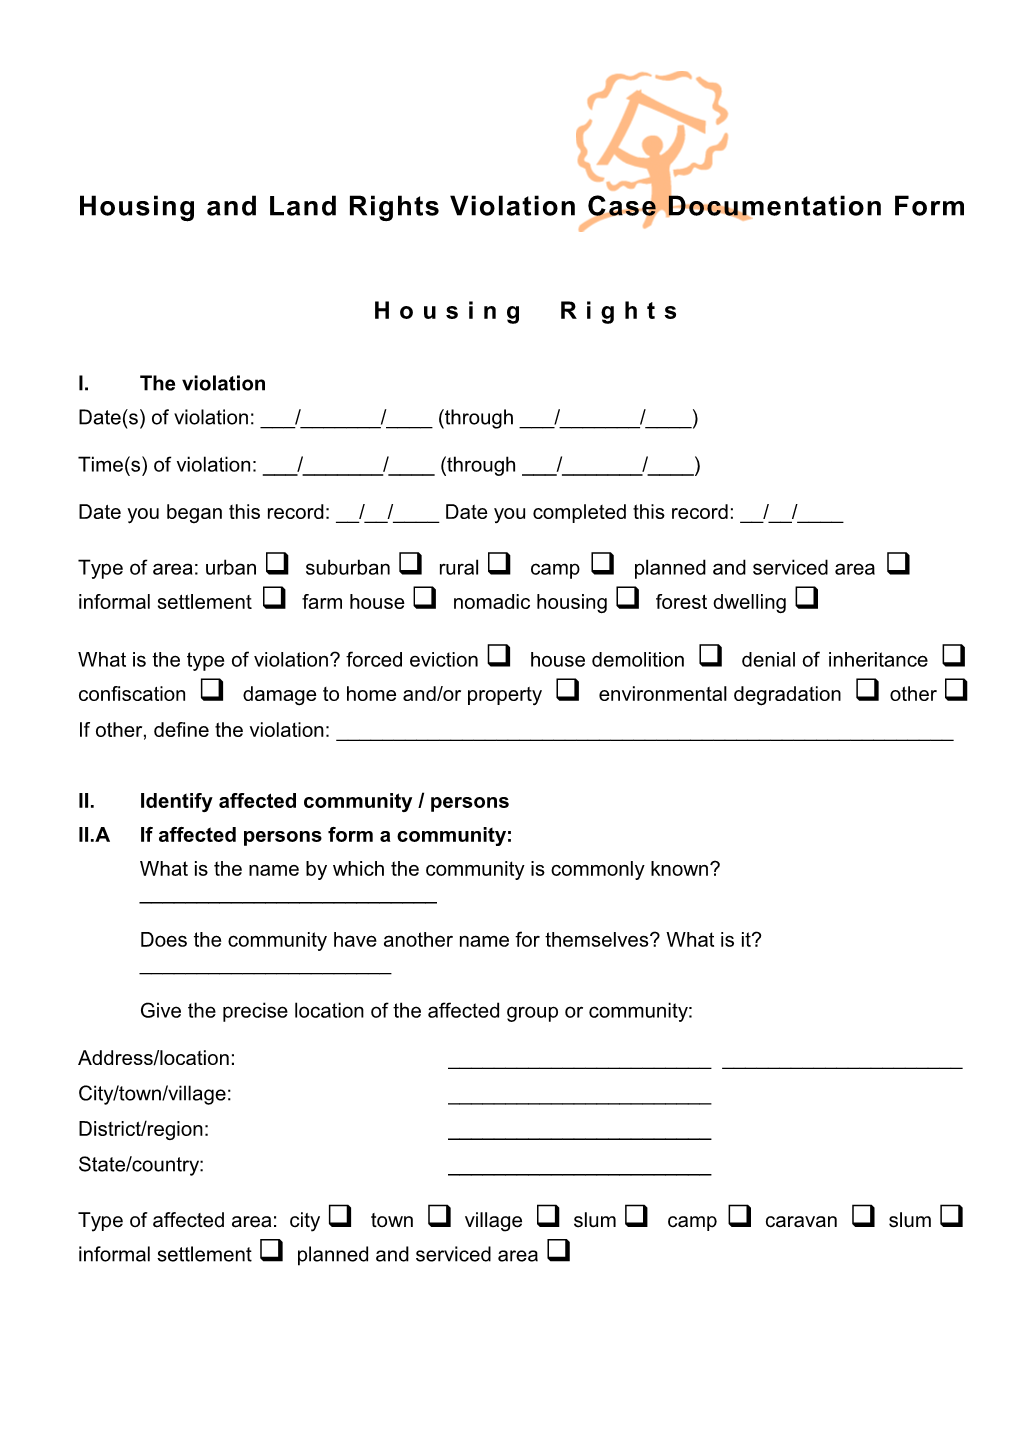 Housing and Land Rights Violation Case Documentation Form